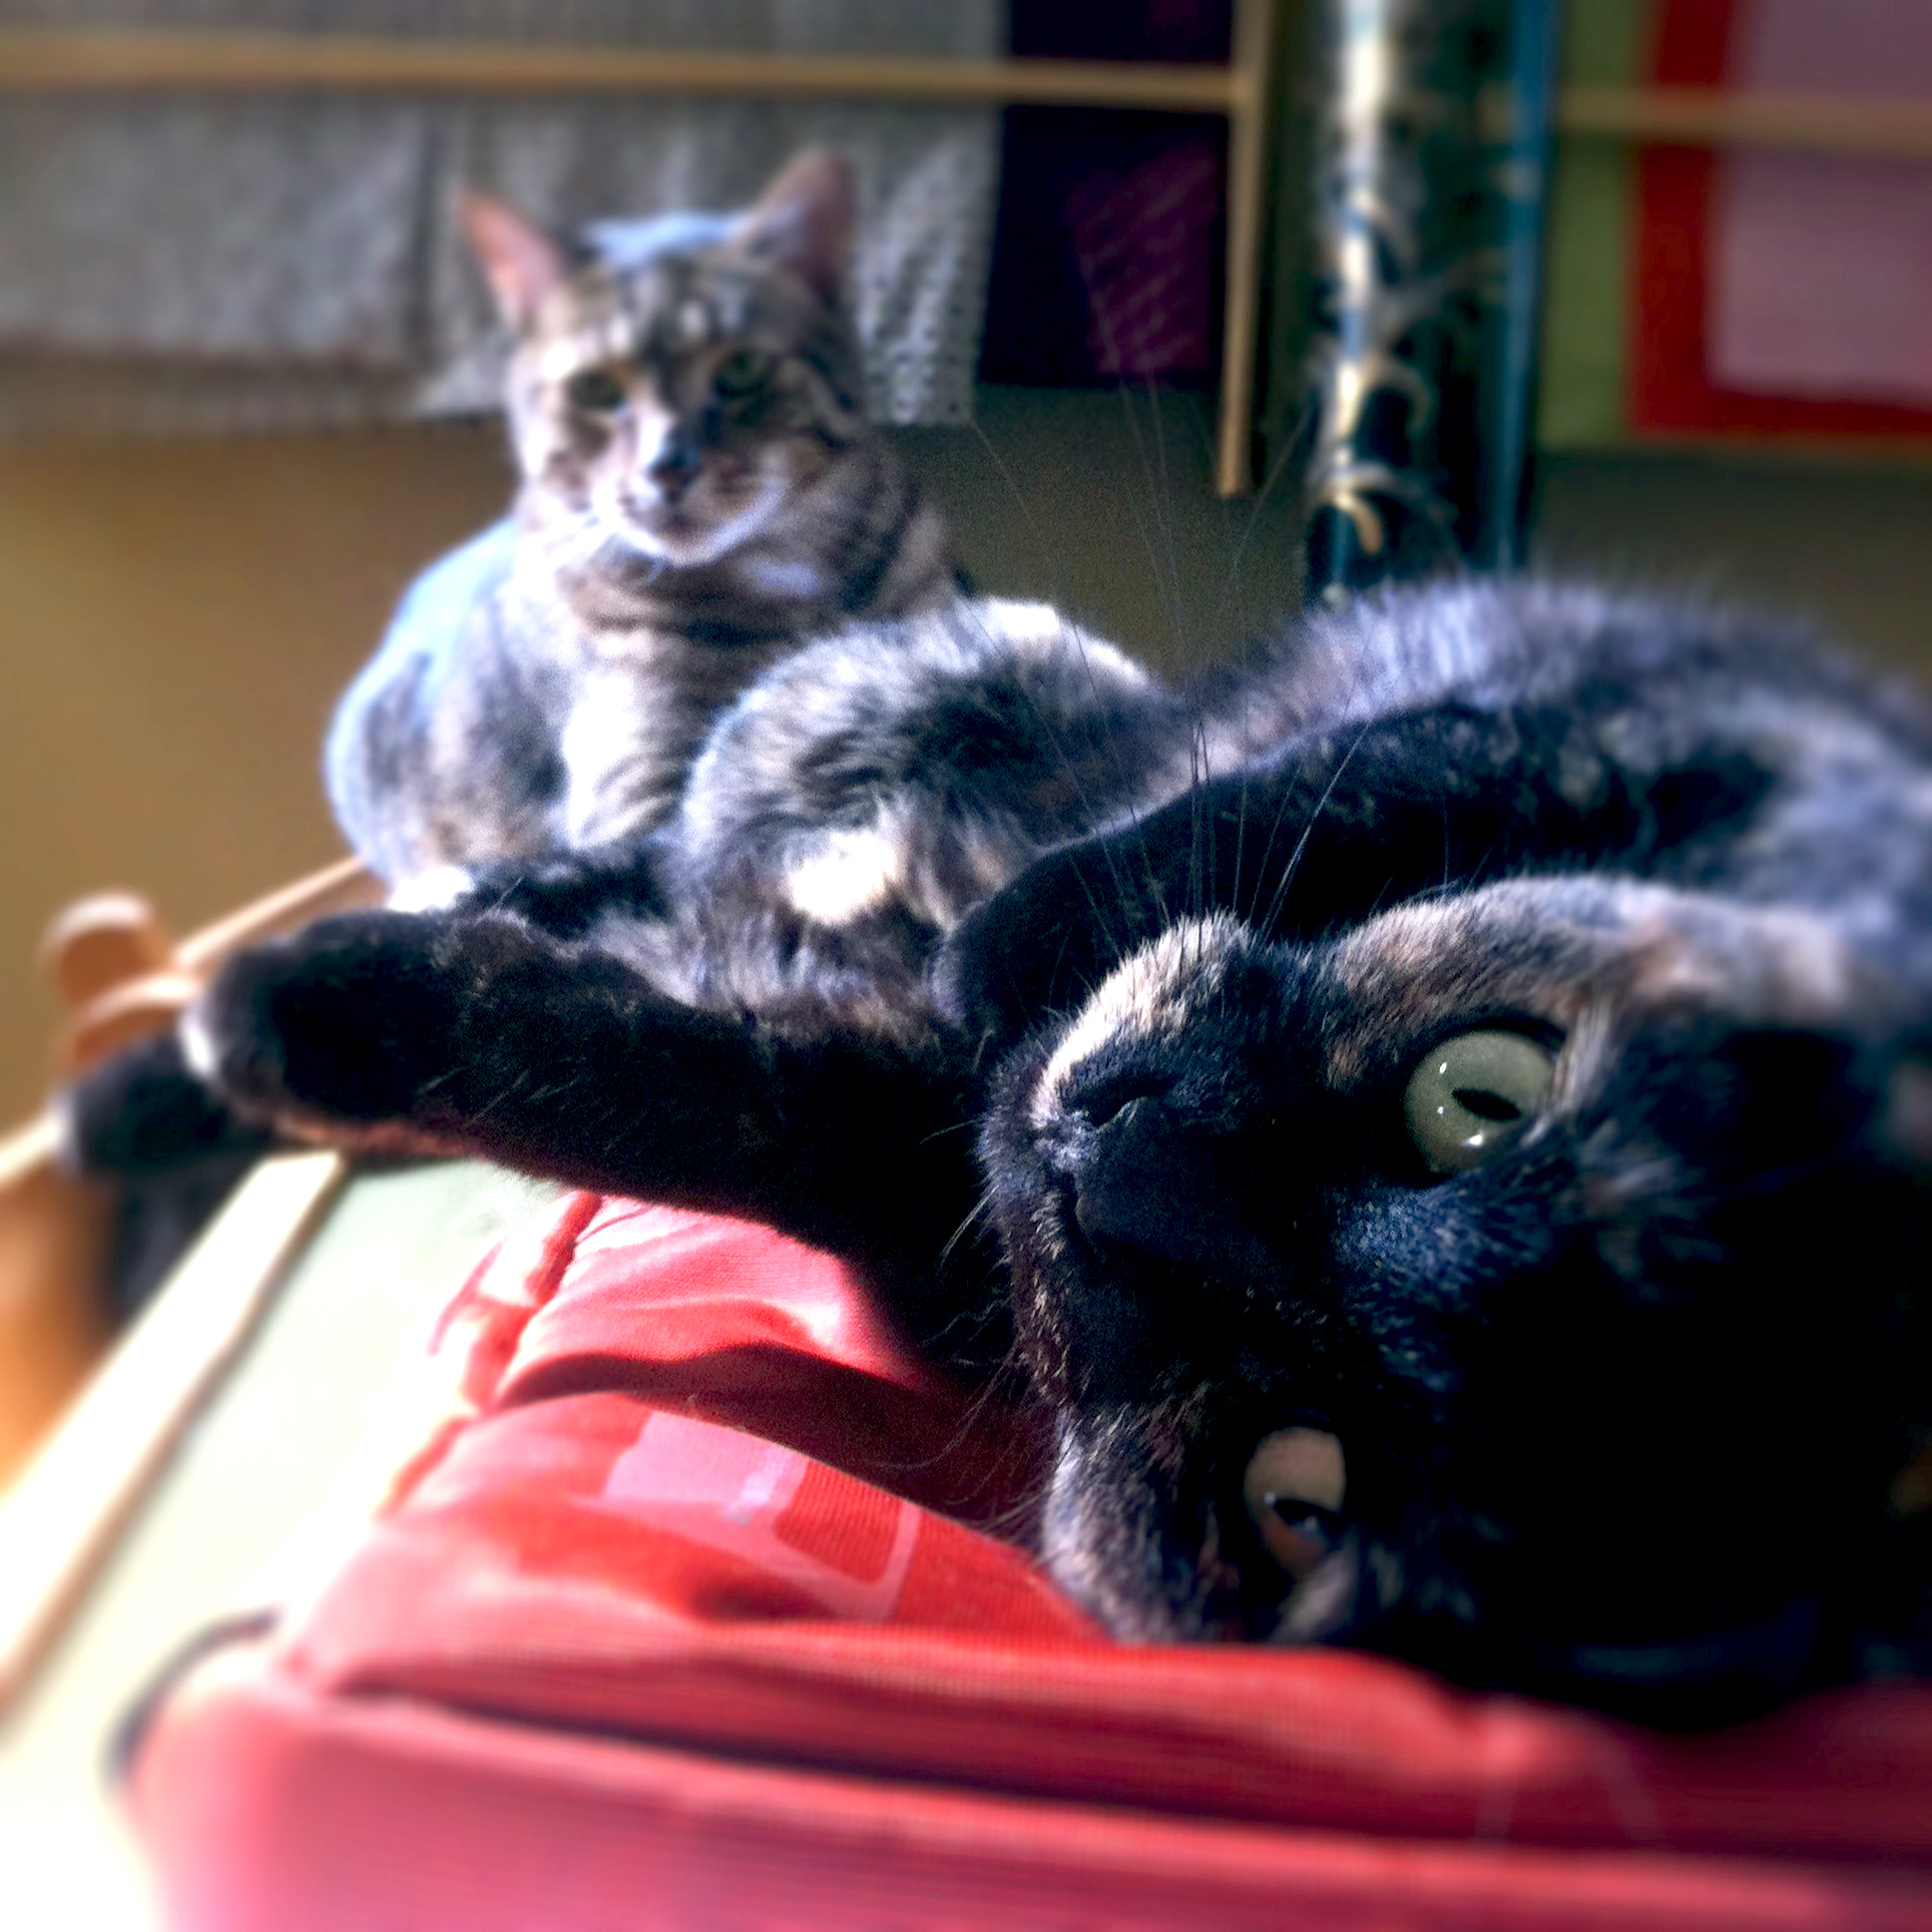 The Tortie cat and the Tabby cat in the sun - Dinky and Cia Maru